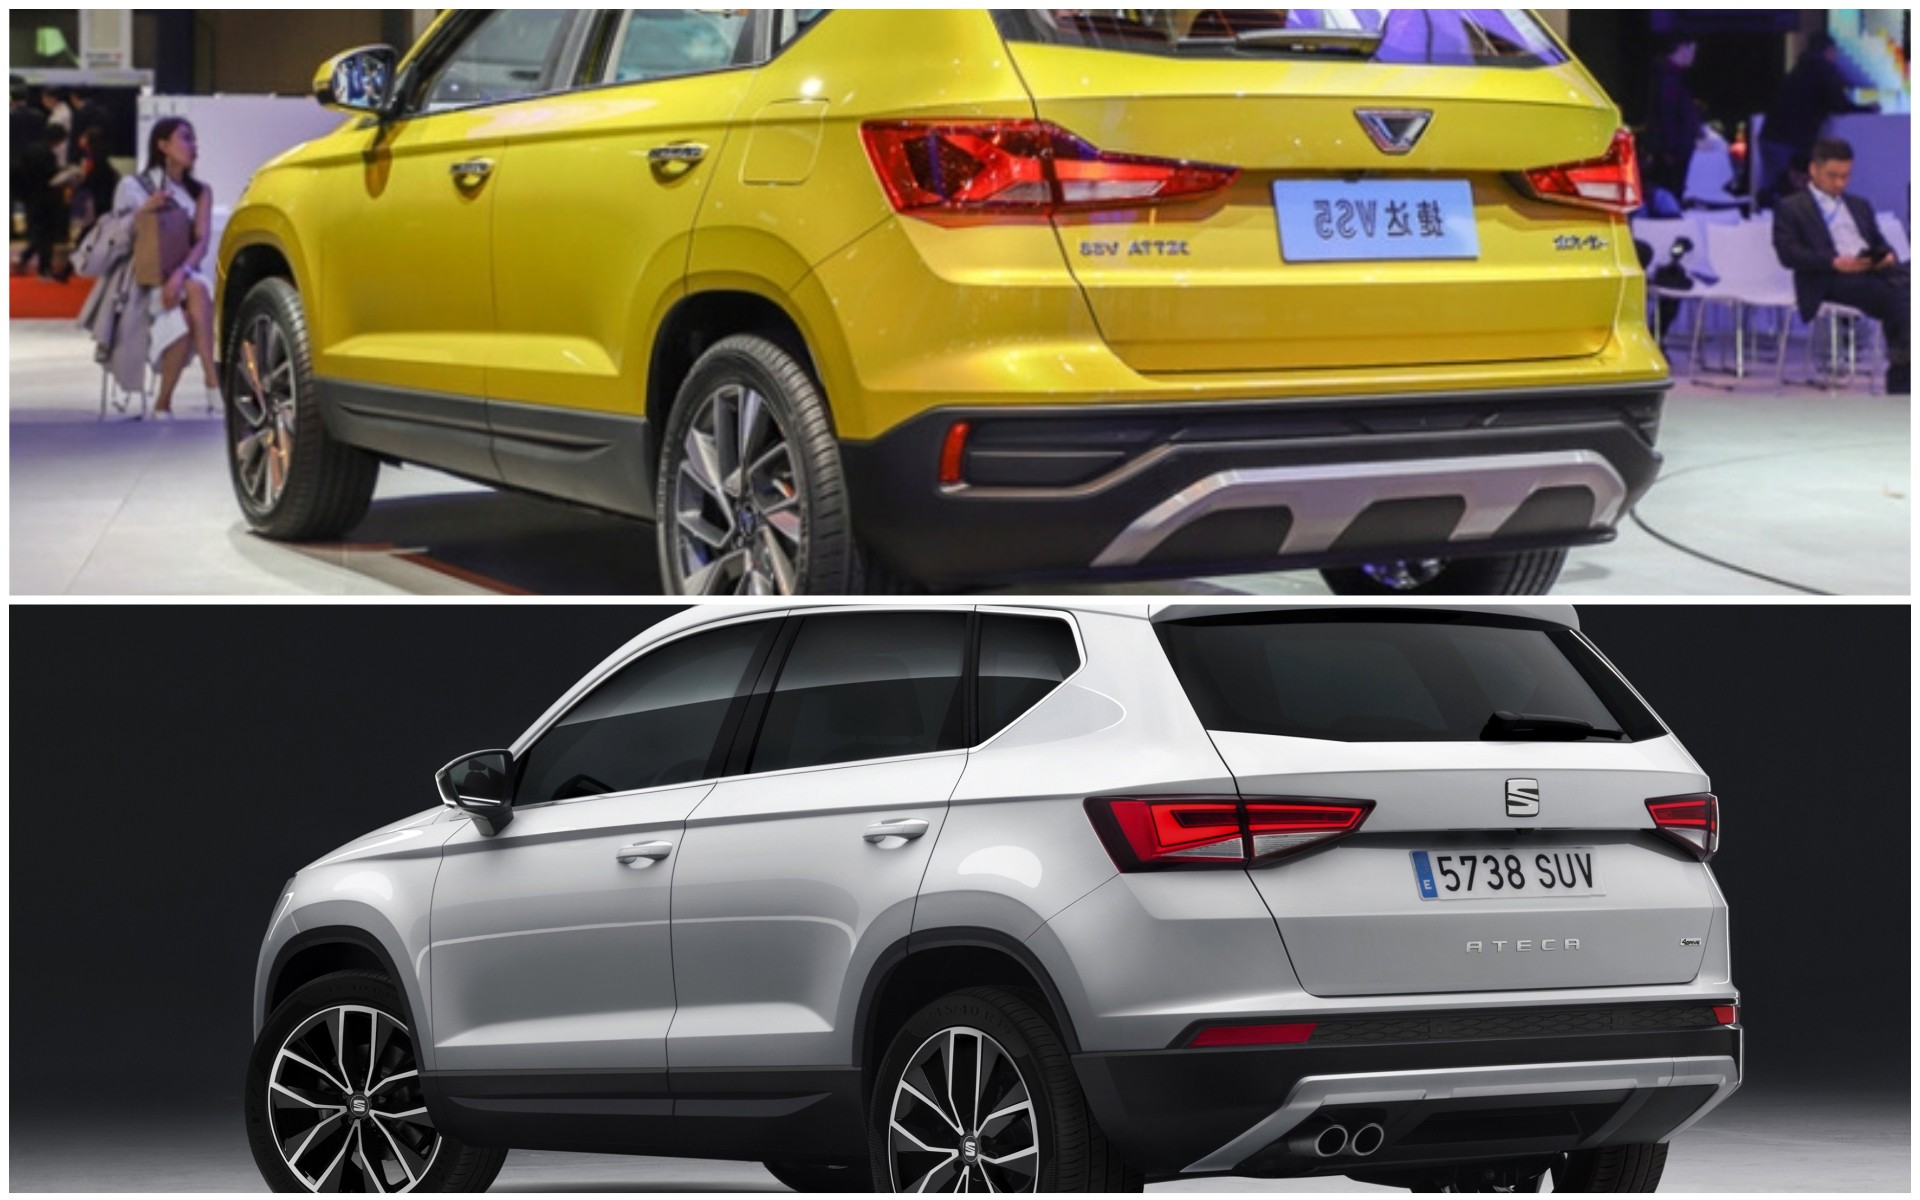 The VW Jetta SUV Really Is Just a Ateca - autoevolution